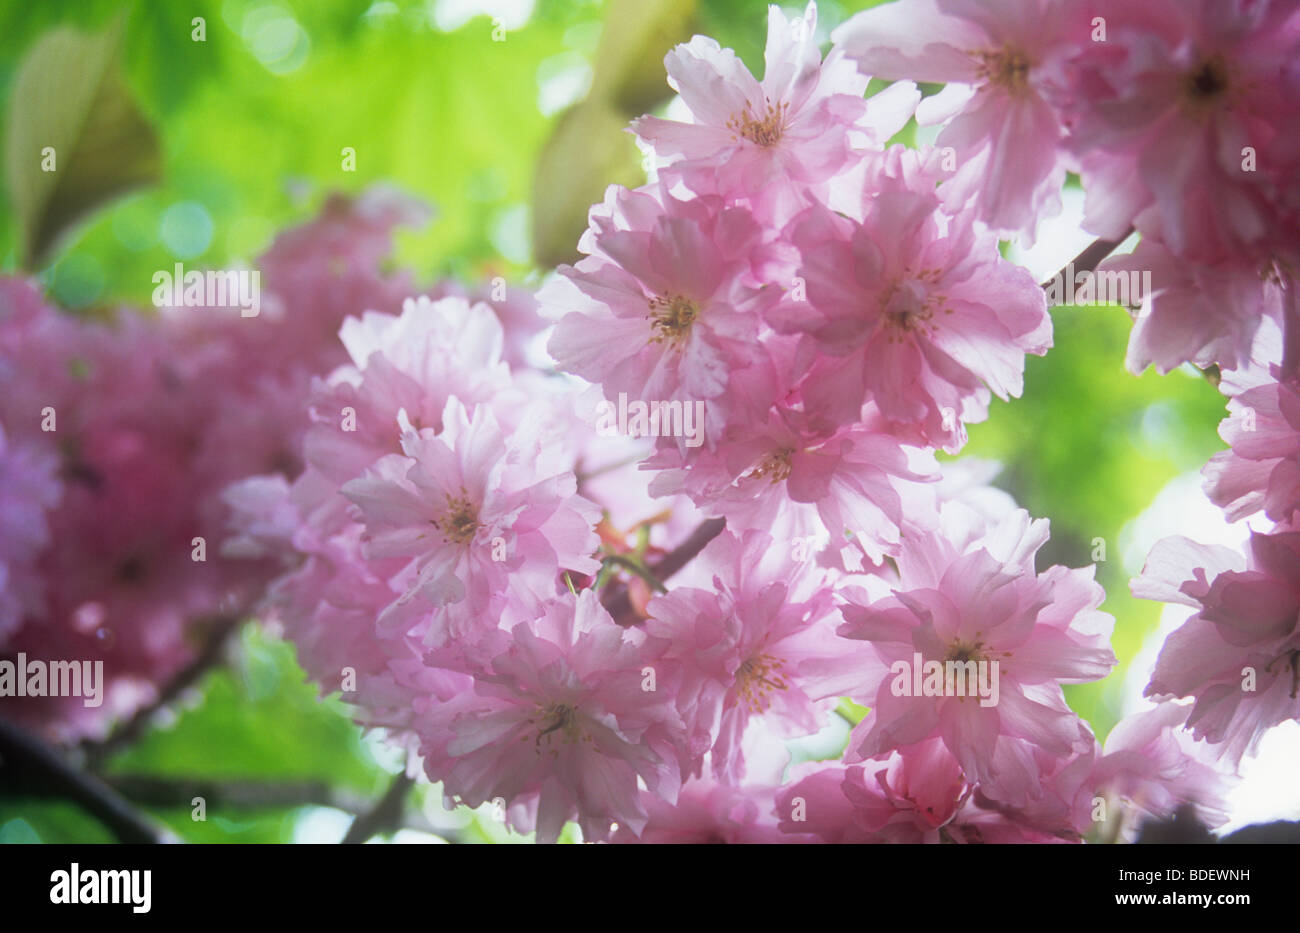 Stem of backlit pale pink double blossoms of Flowering cherry or Prunus Pink Perfection tree with backlit maple leaves beyond Stock Photo